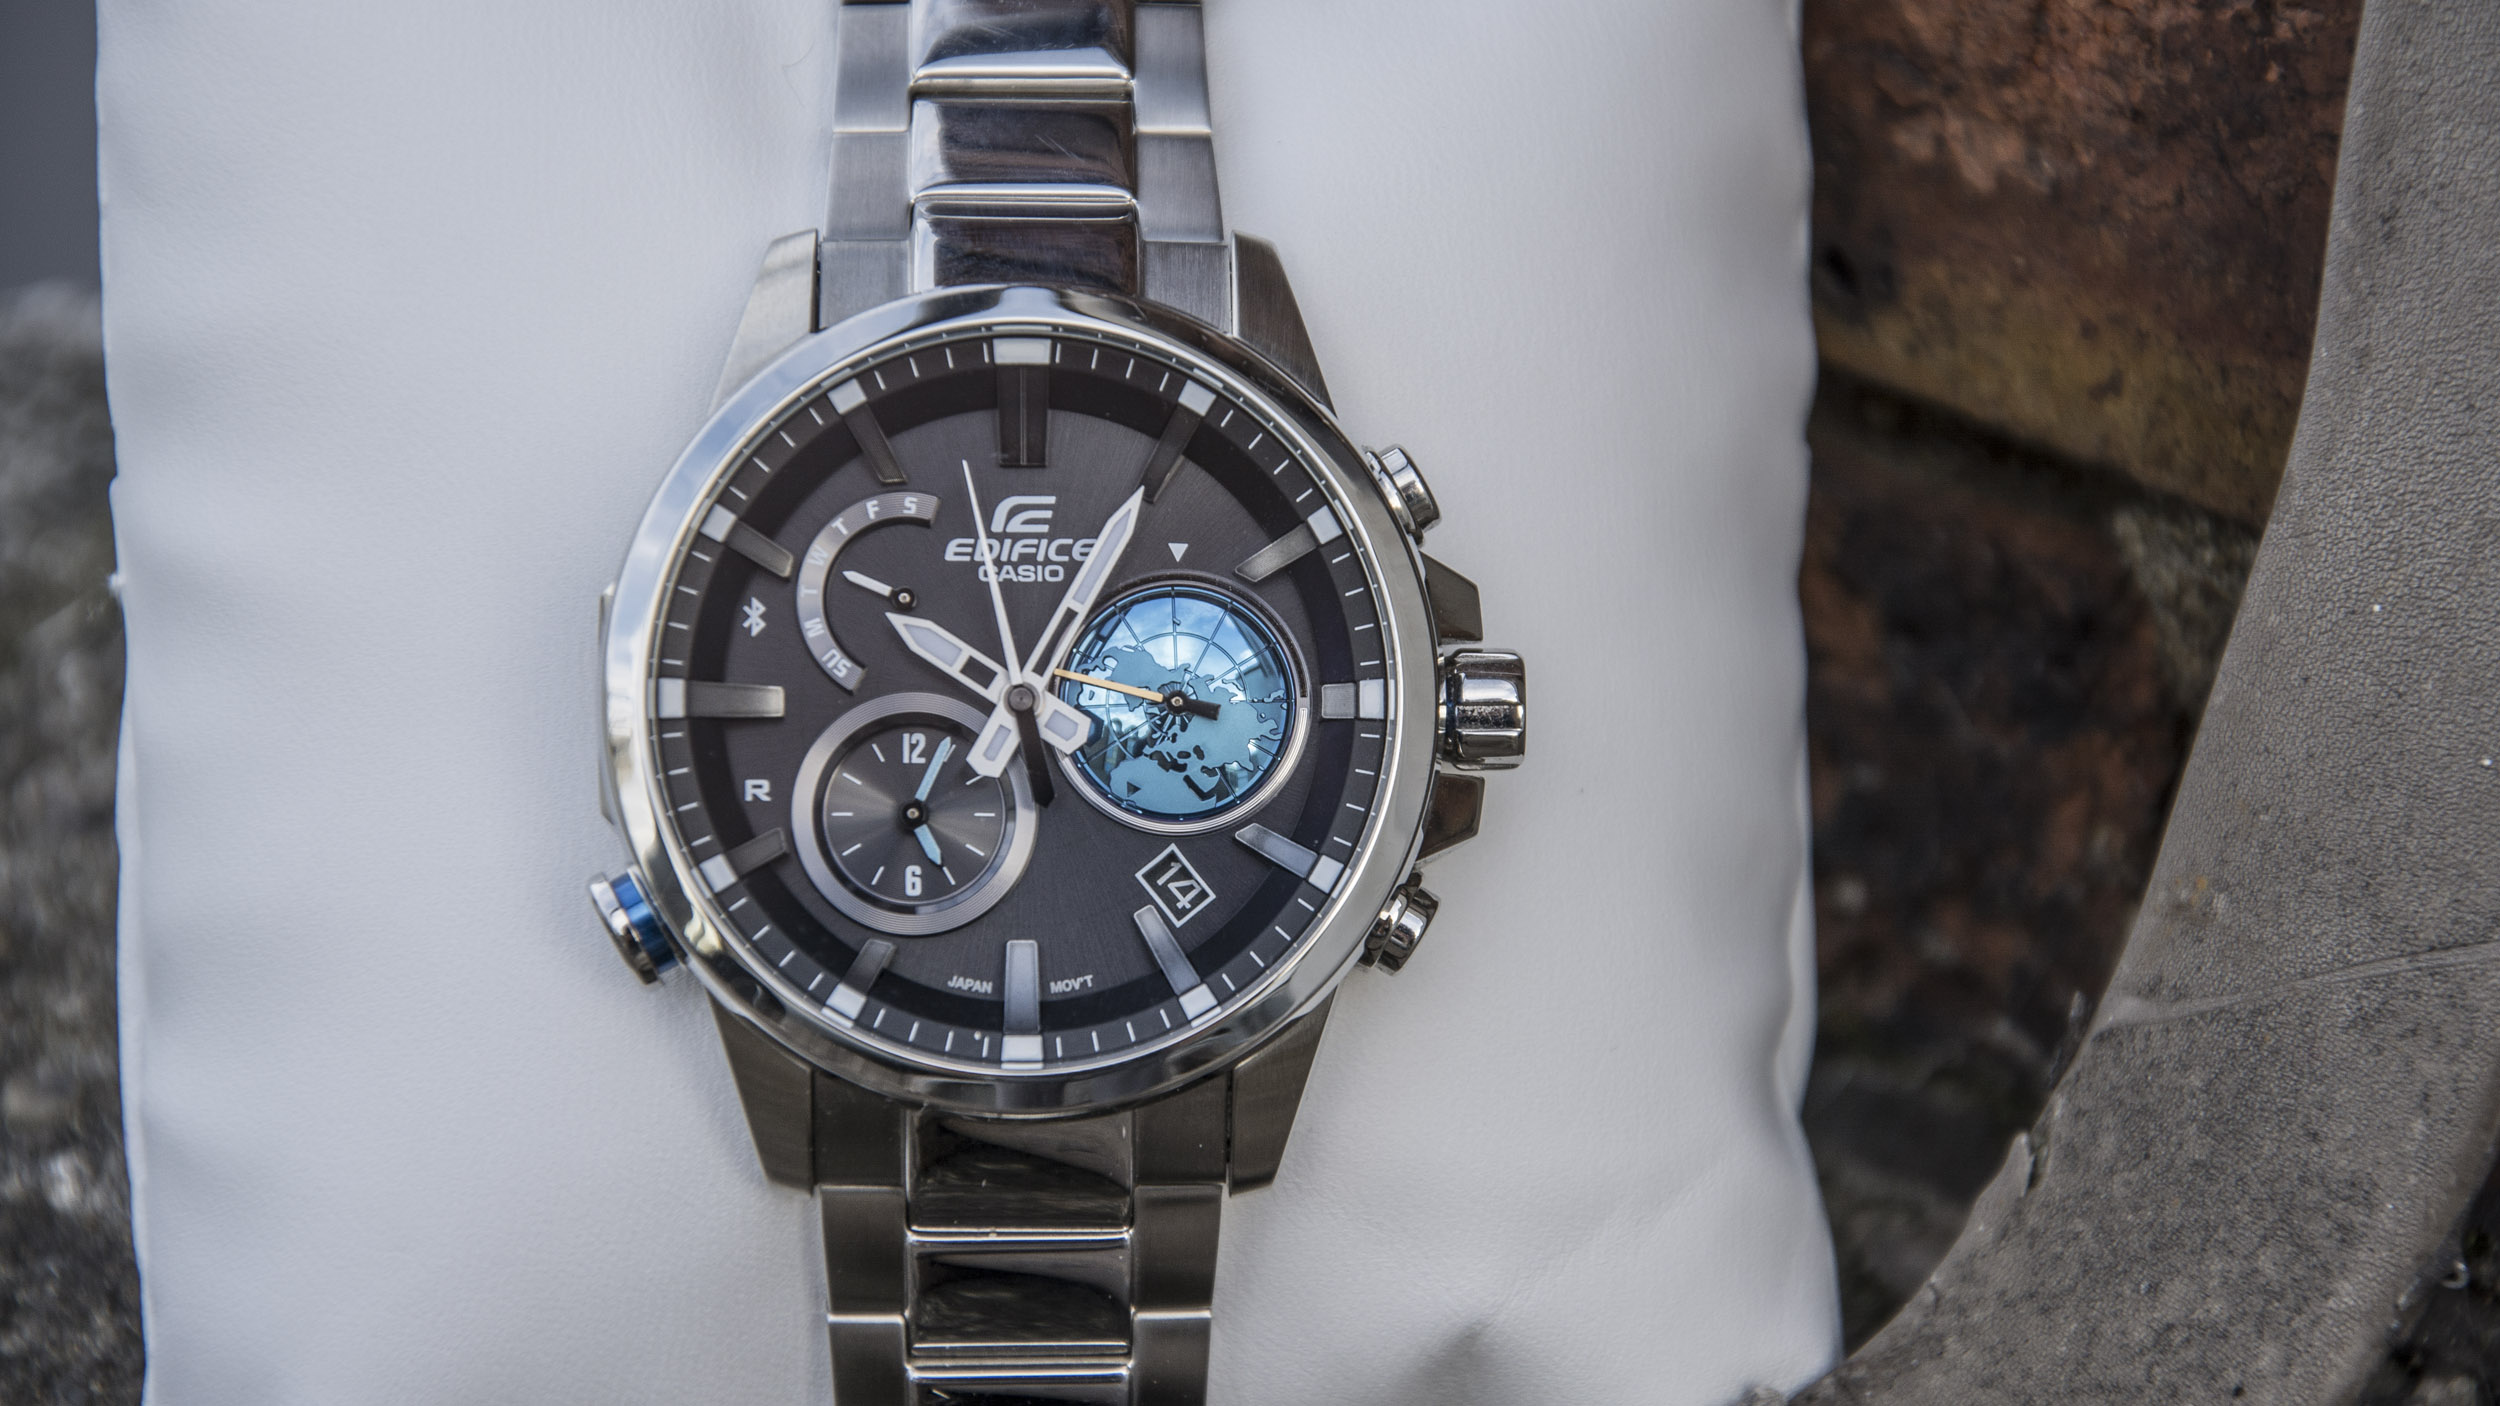 Casio Edifice review: The smart-ish watch might have the answer to the wearables conundrum